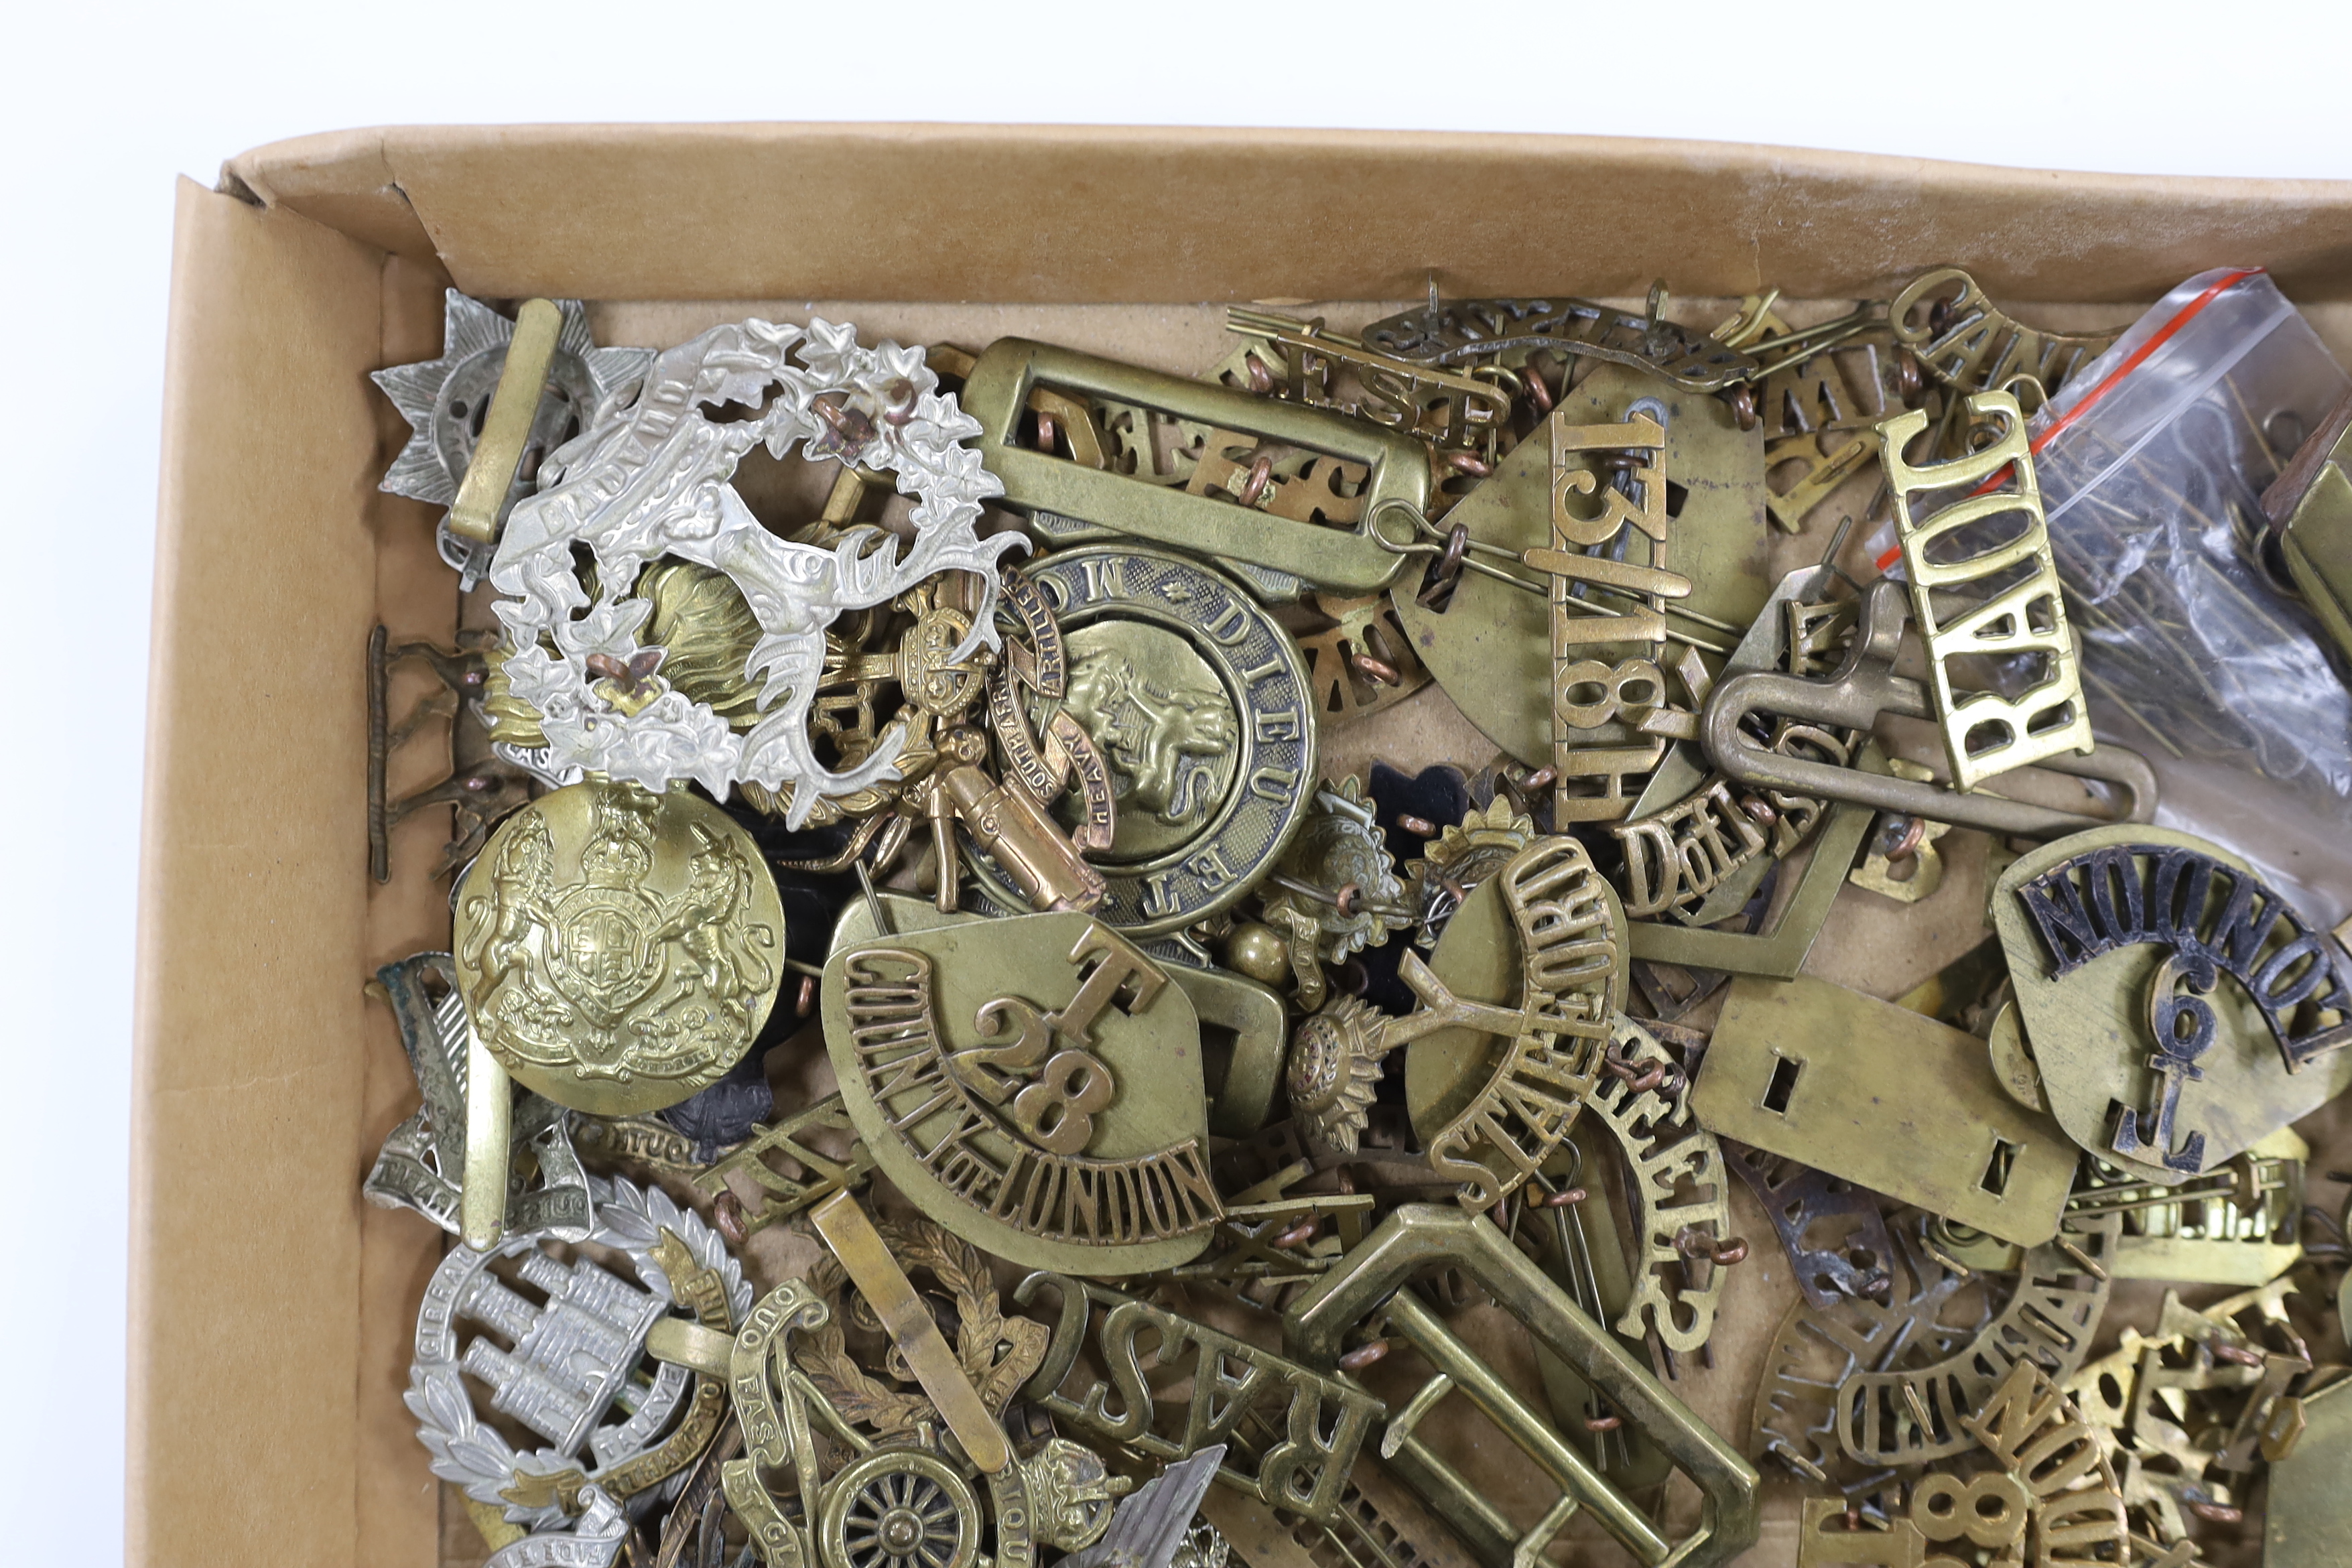 A collection of military cap badges, shoulder titles, pins, backing plates, belt buckles, etc.